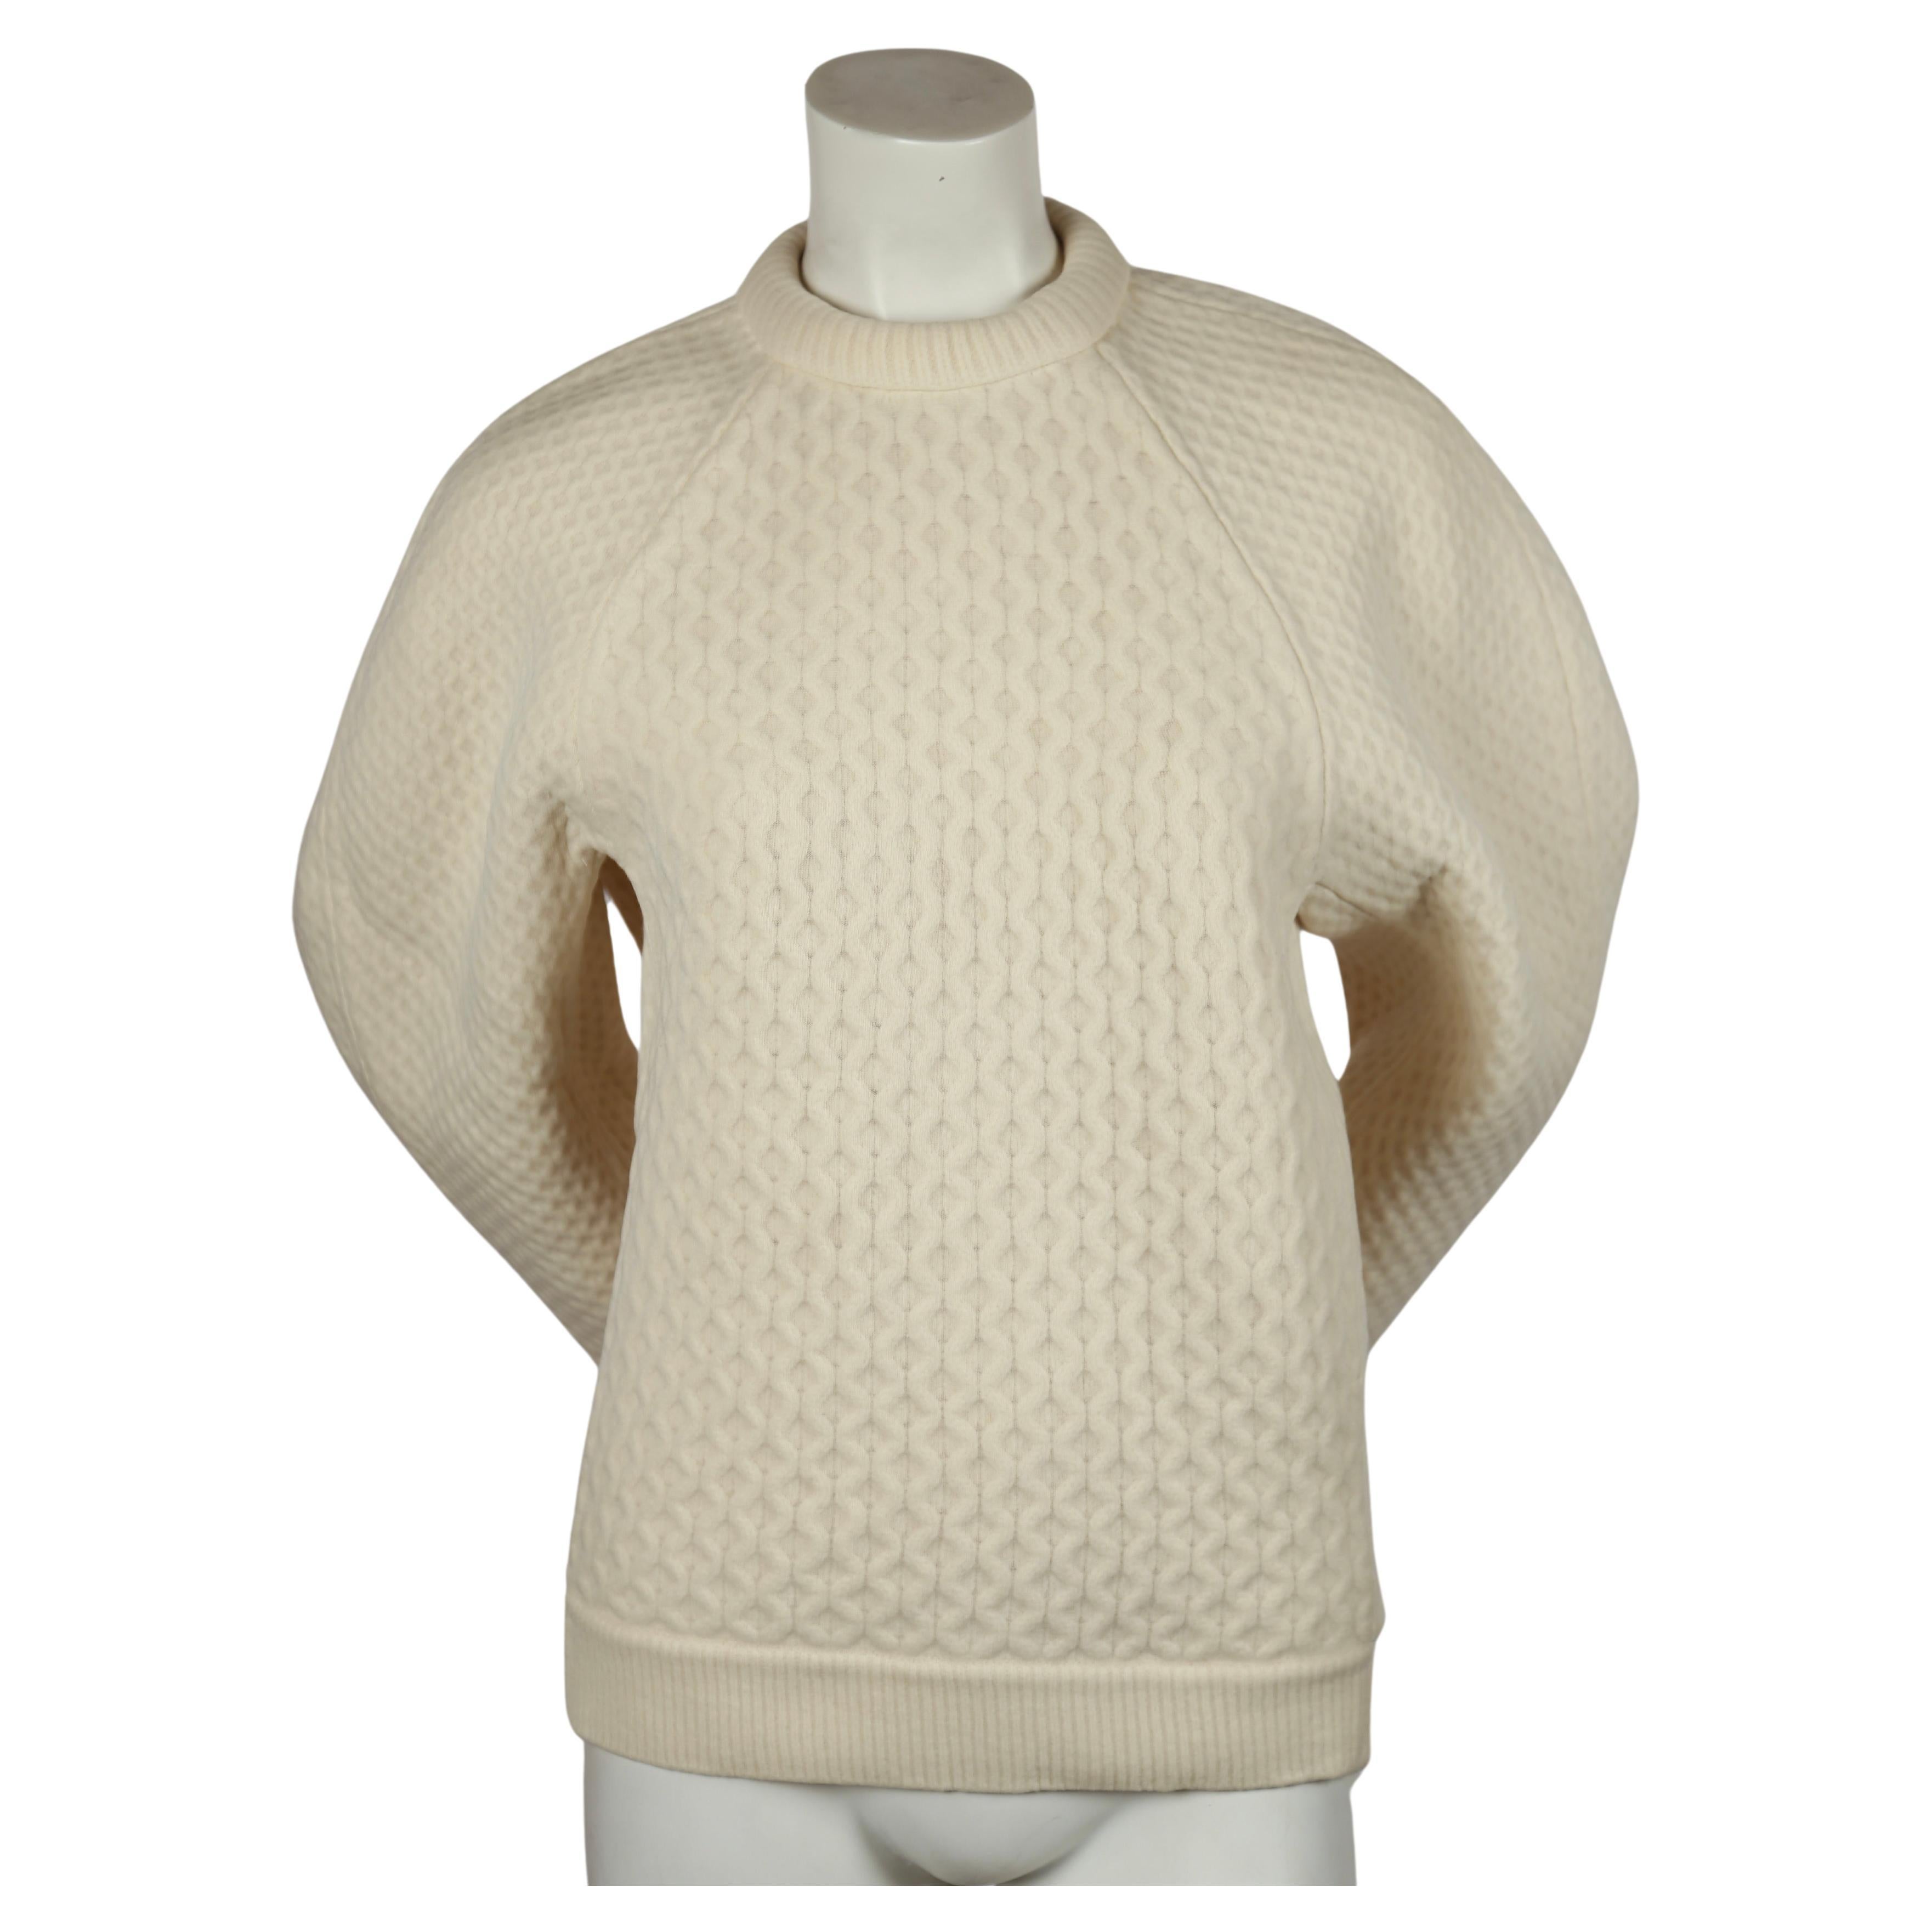 Spectacular oversized cream sweater with rounded sleeves and net overlay designed by Phoebe Philo for Celine. This is a very rare piece of Old Celine. Labeled a Size S.  Fabric content: 71% Laine and 18% cashmere, 9% cotton and 2% polyamide . Zips